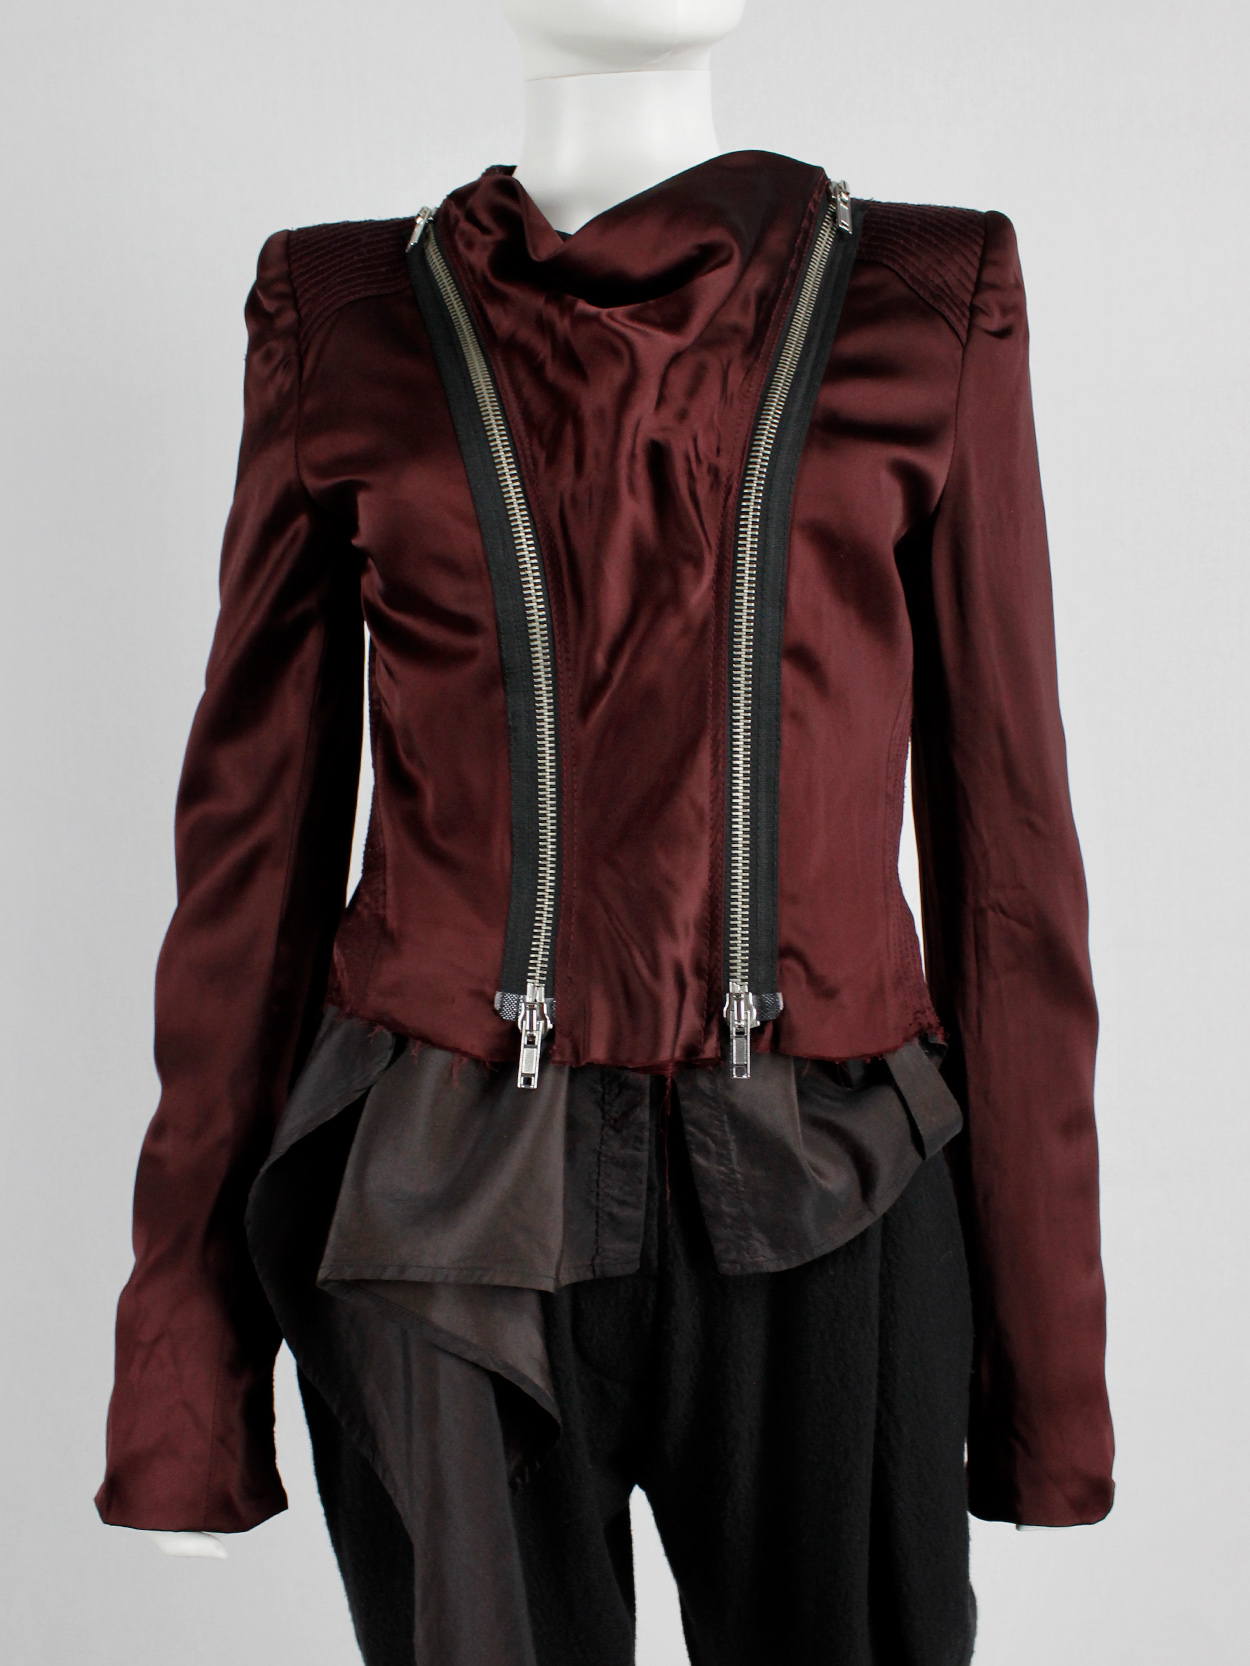 Haider Ackermann burgundy jacket with double front zipper fall 2009 (7)